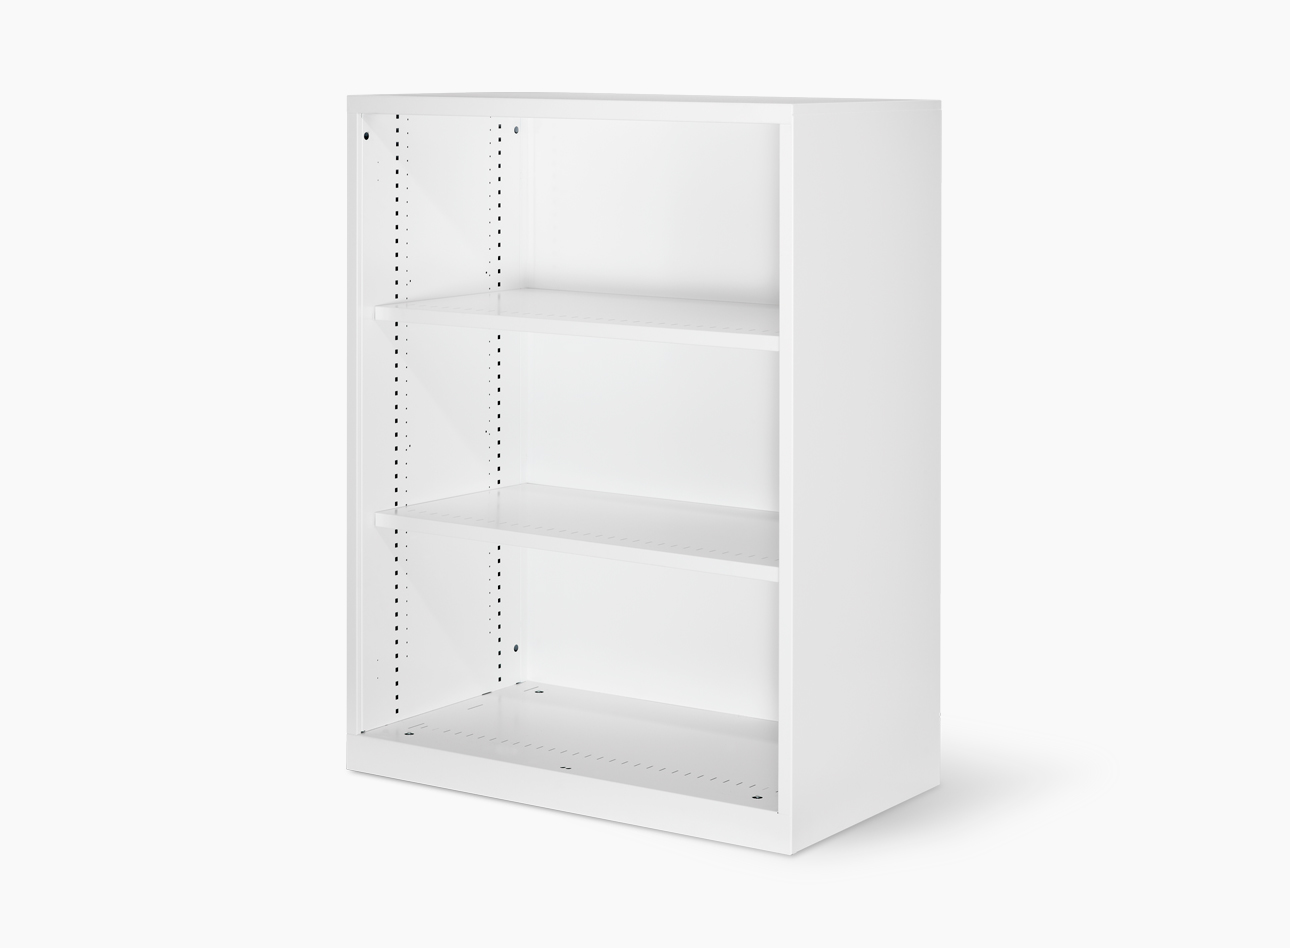 S-Series SP Open Cabinet (Education)